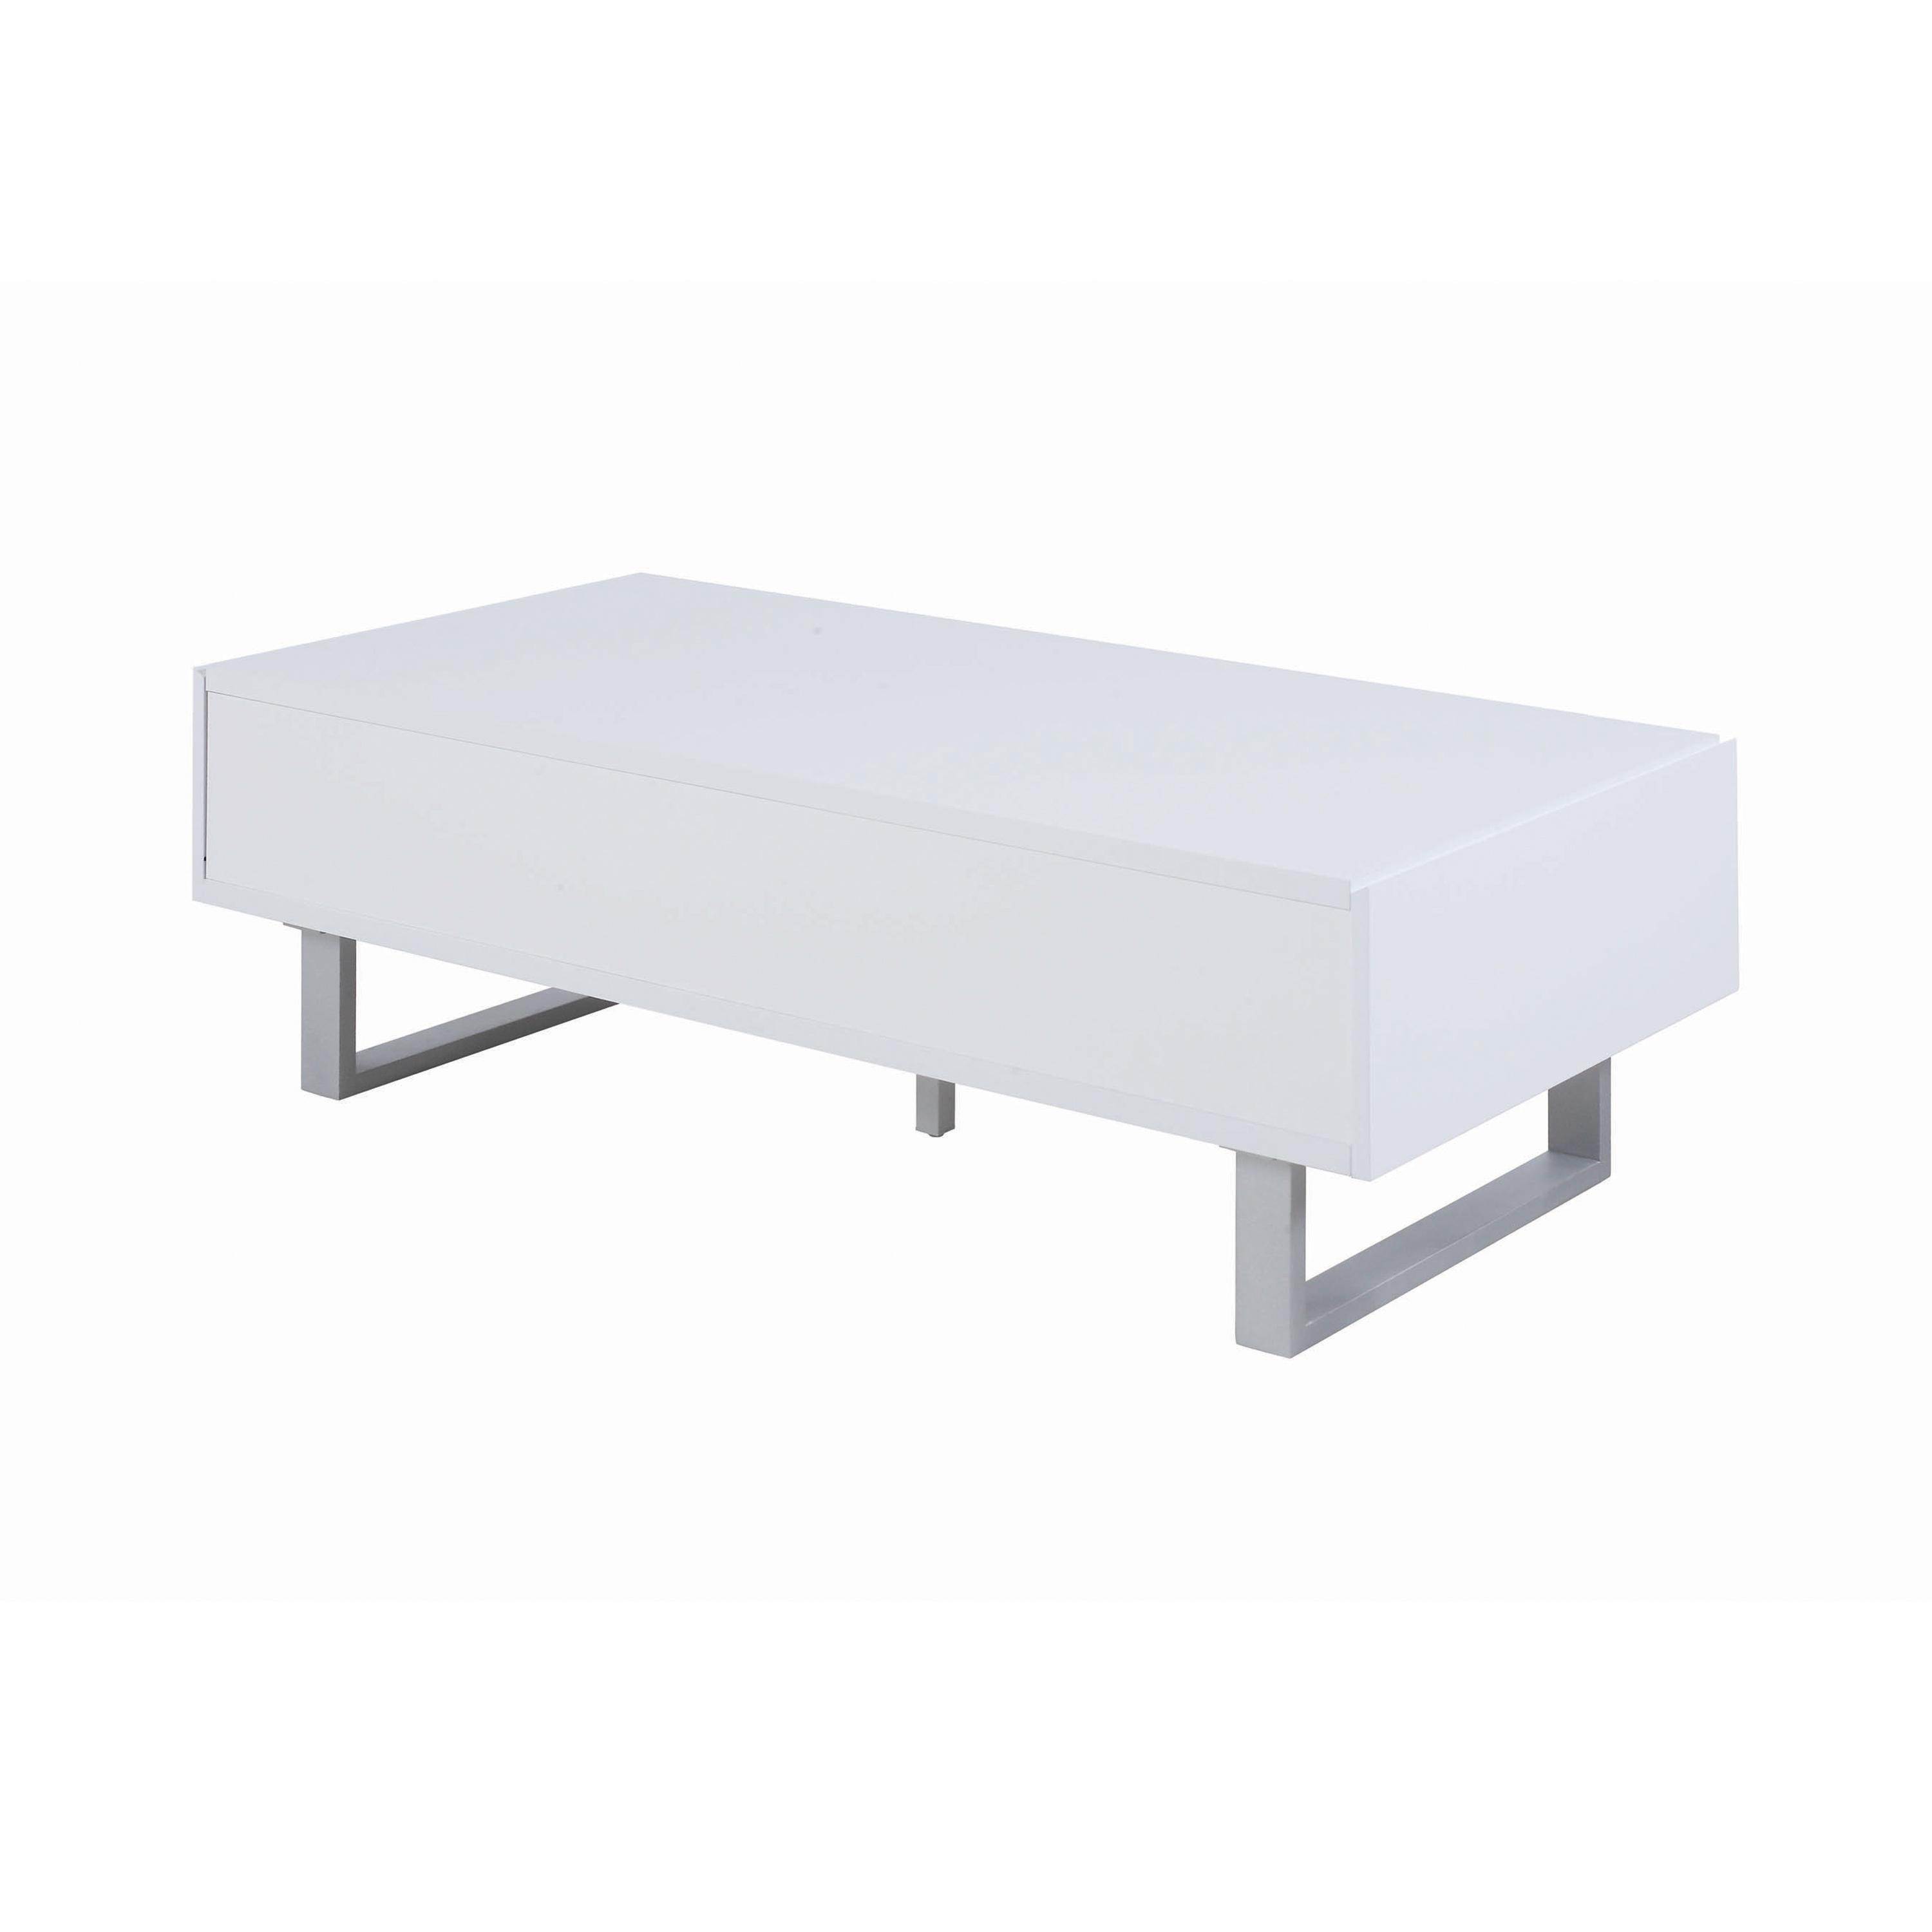 Contemporary Coffee Table 705698 705698 in White 